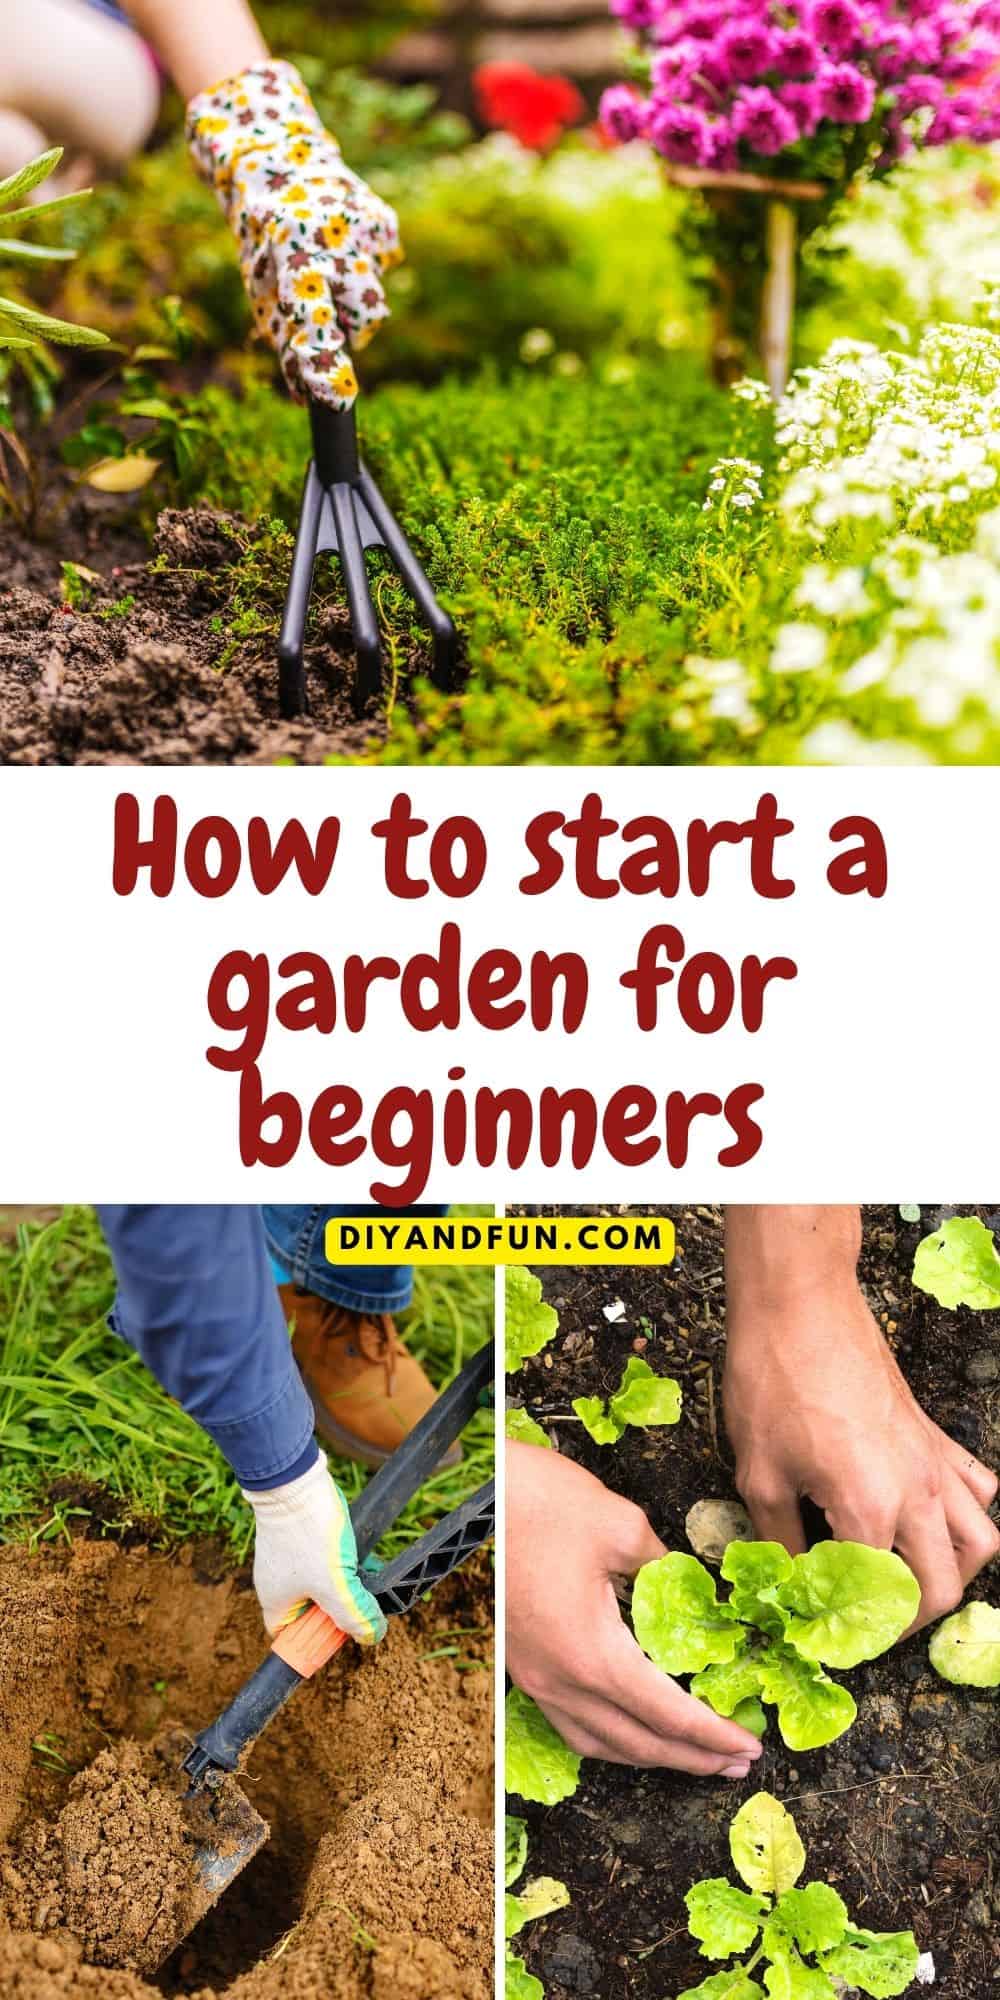 How to start a garden for beginners, a simple guide for designing and planting a flower garden that is easy to care for.